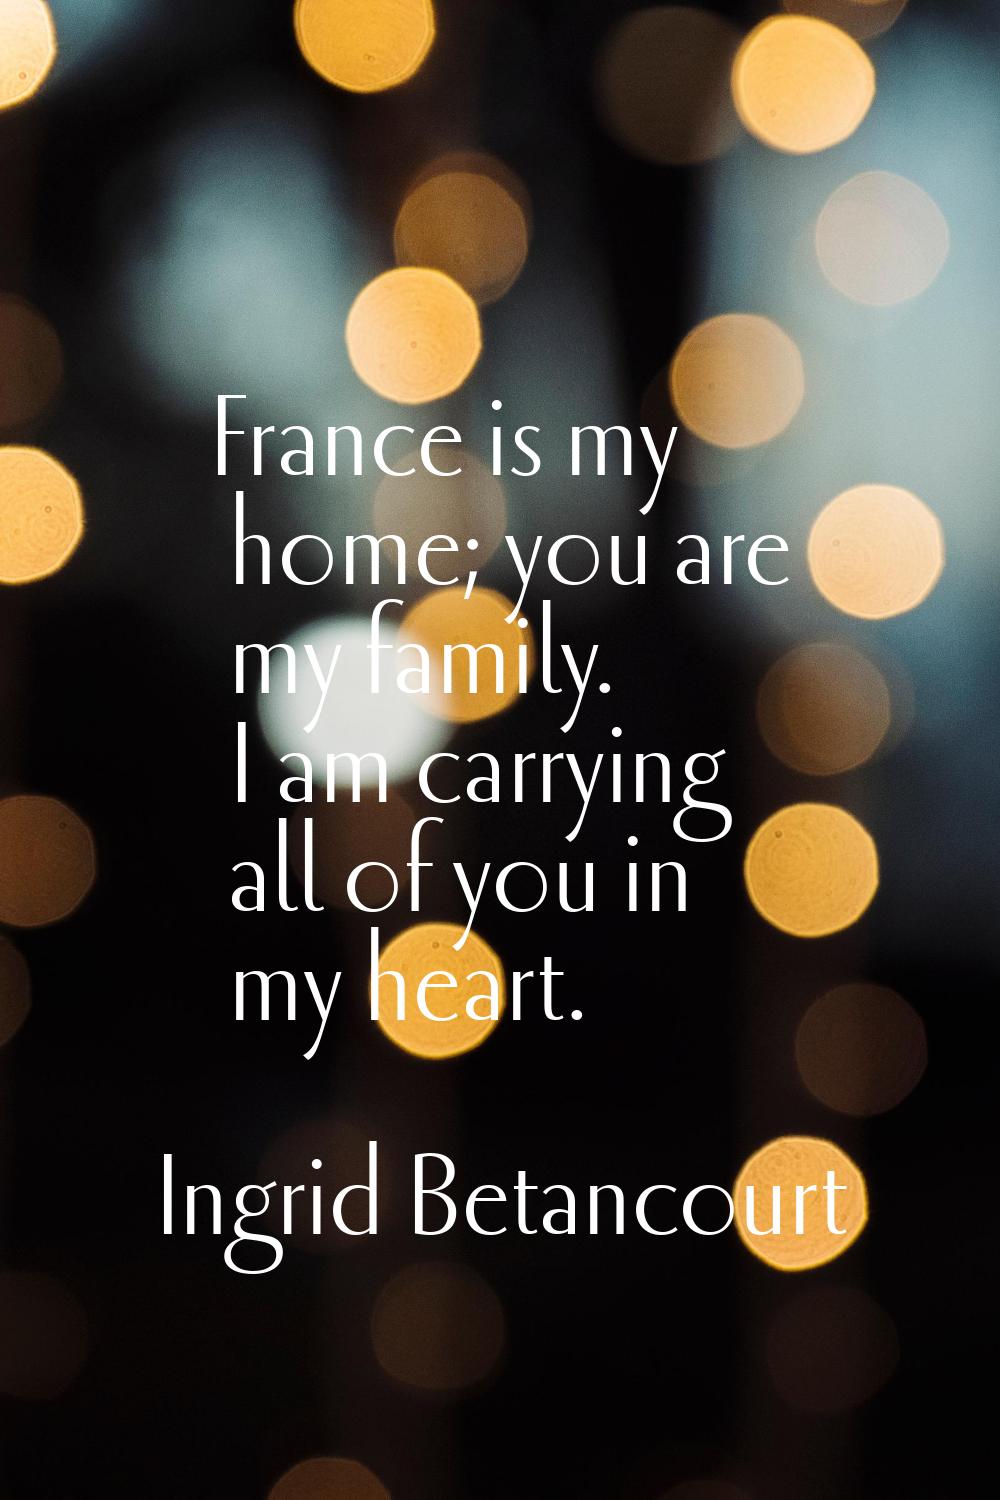 France is my home; you are my family. I am carrying all of you in my heart.